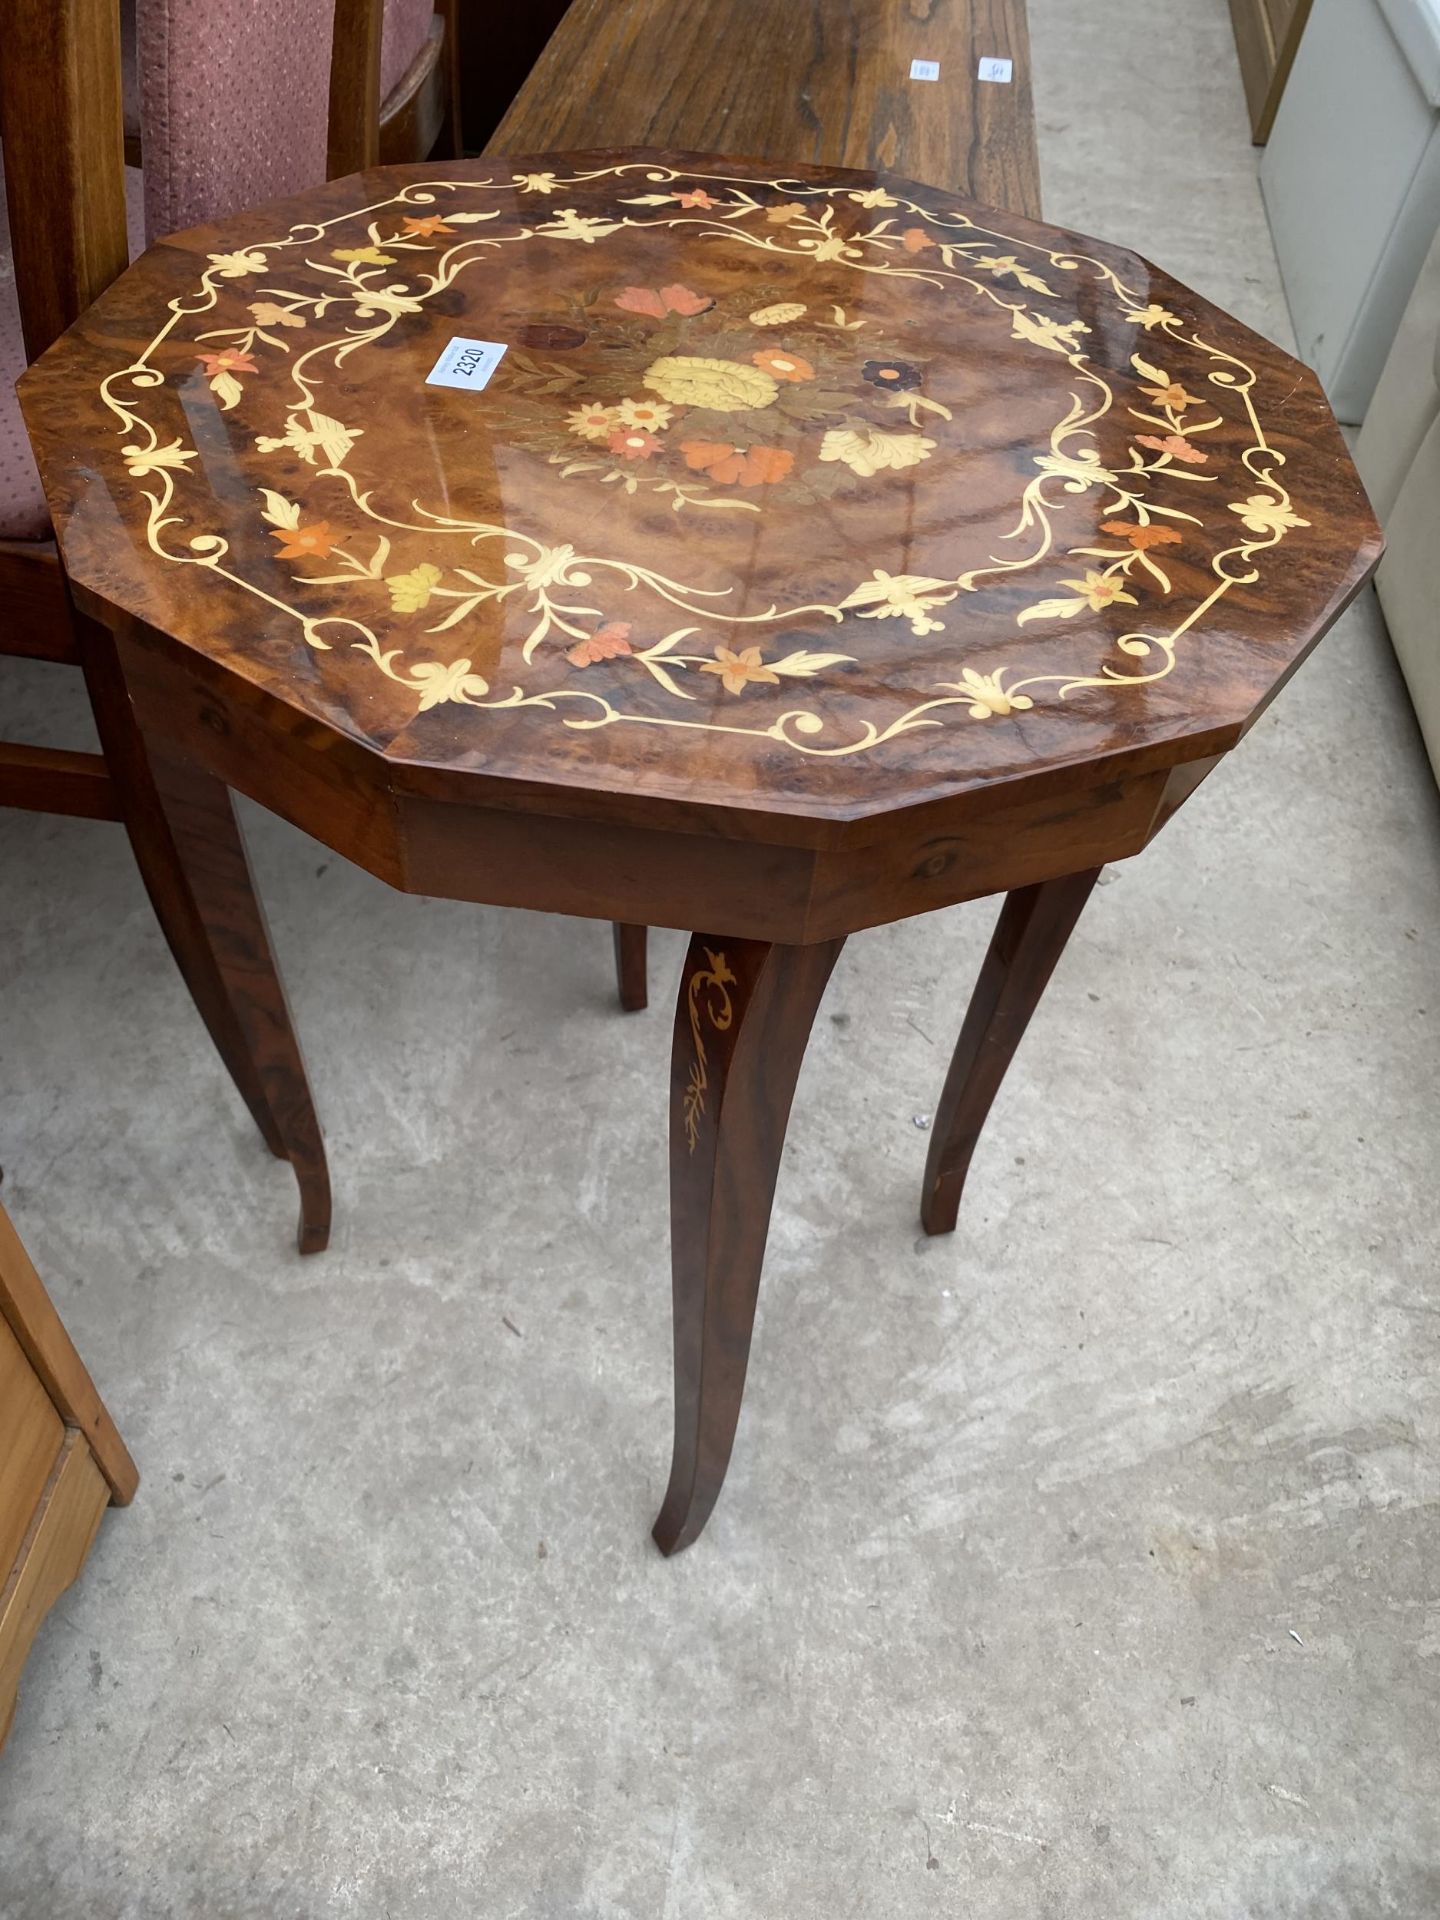 AN ITALIAN PROFUSELY INLAID MUSICAL TABLE, 19" DIAMETER